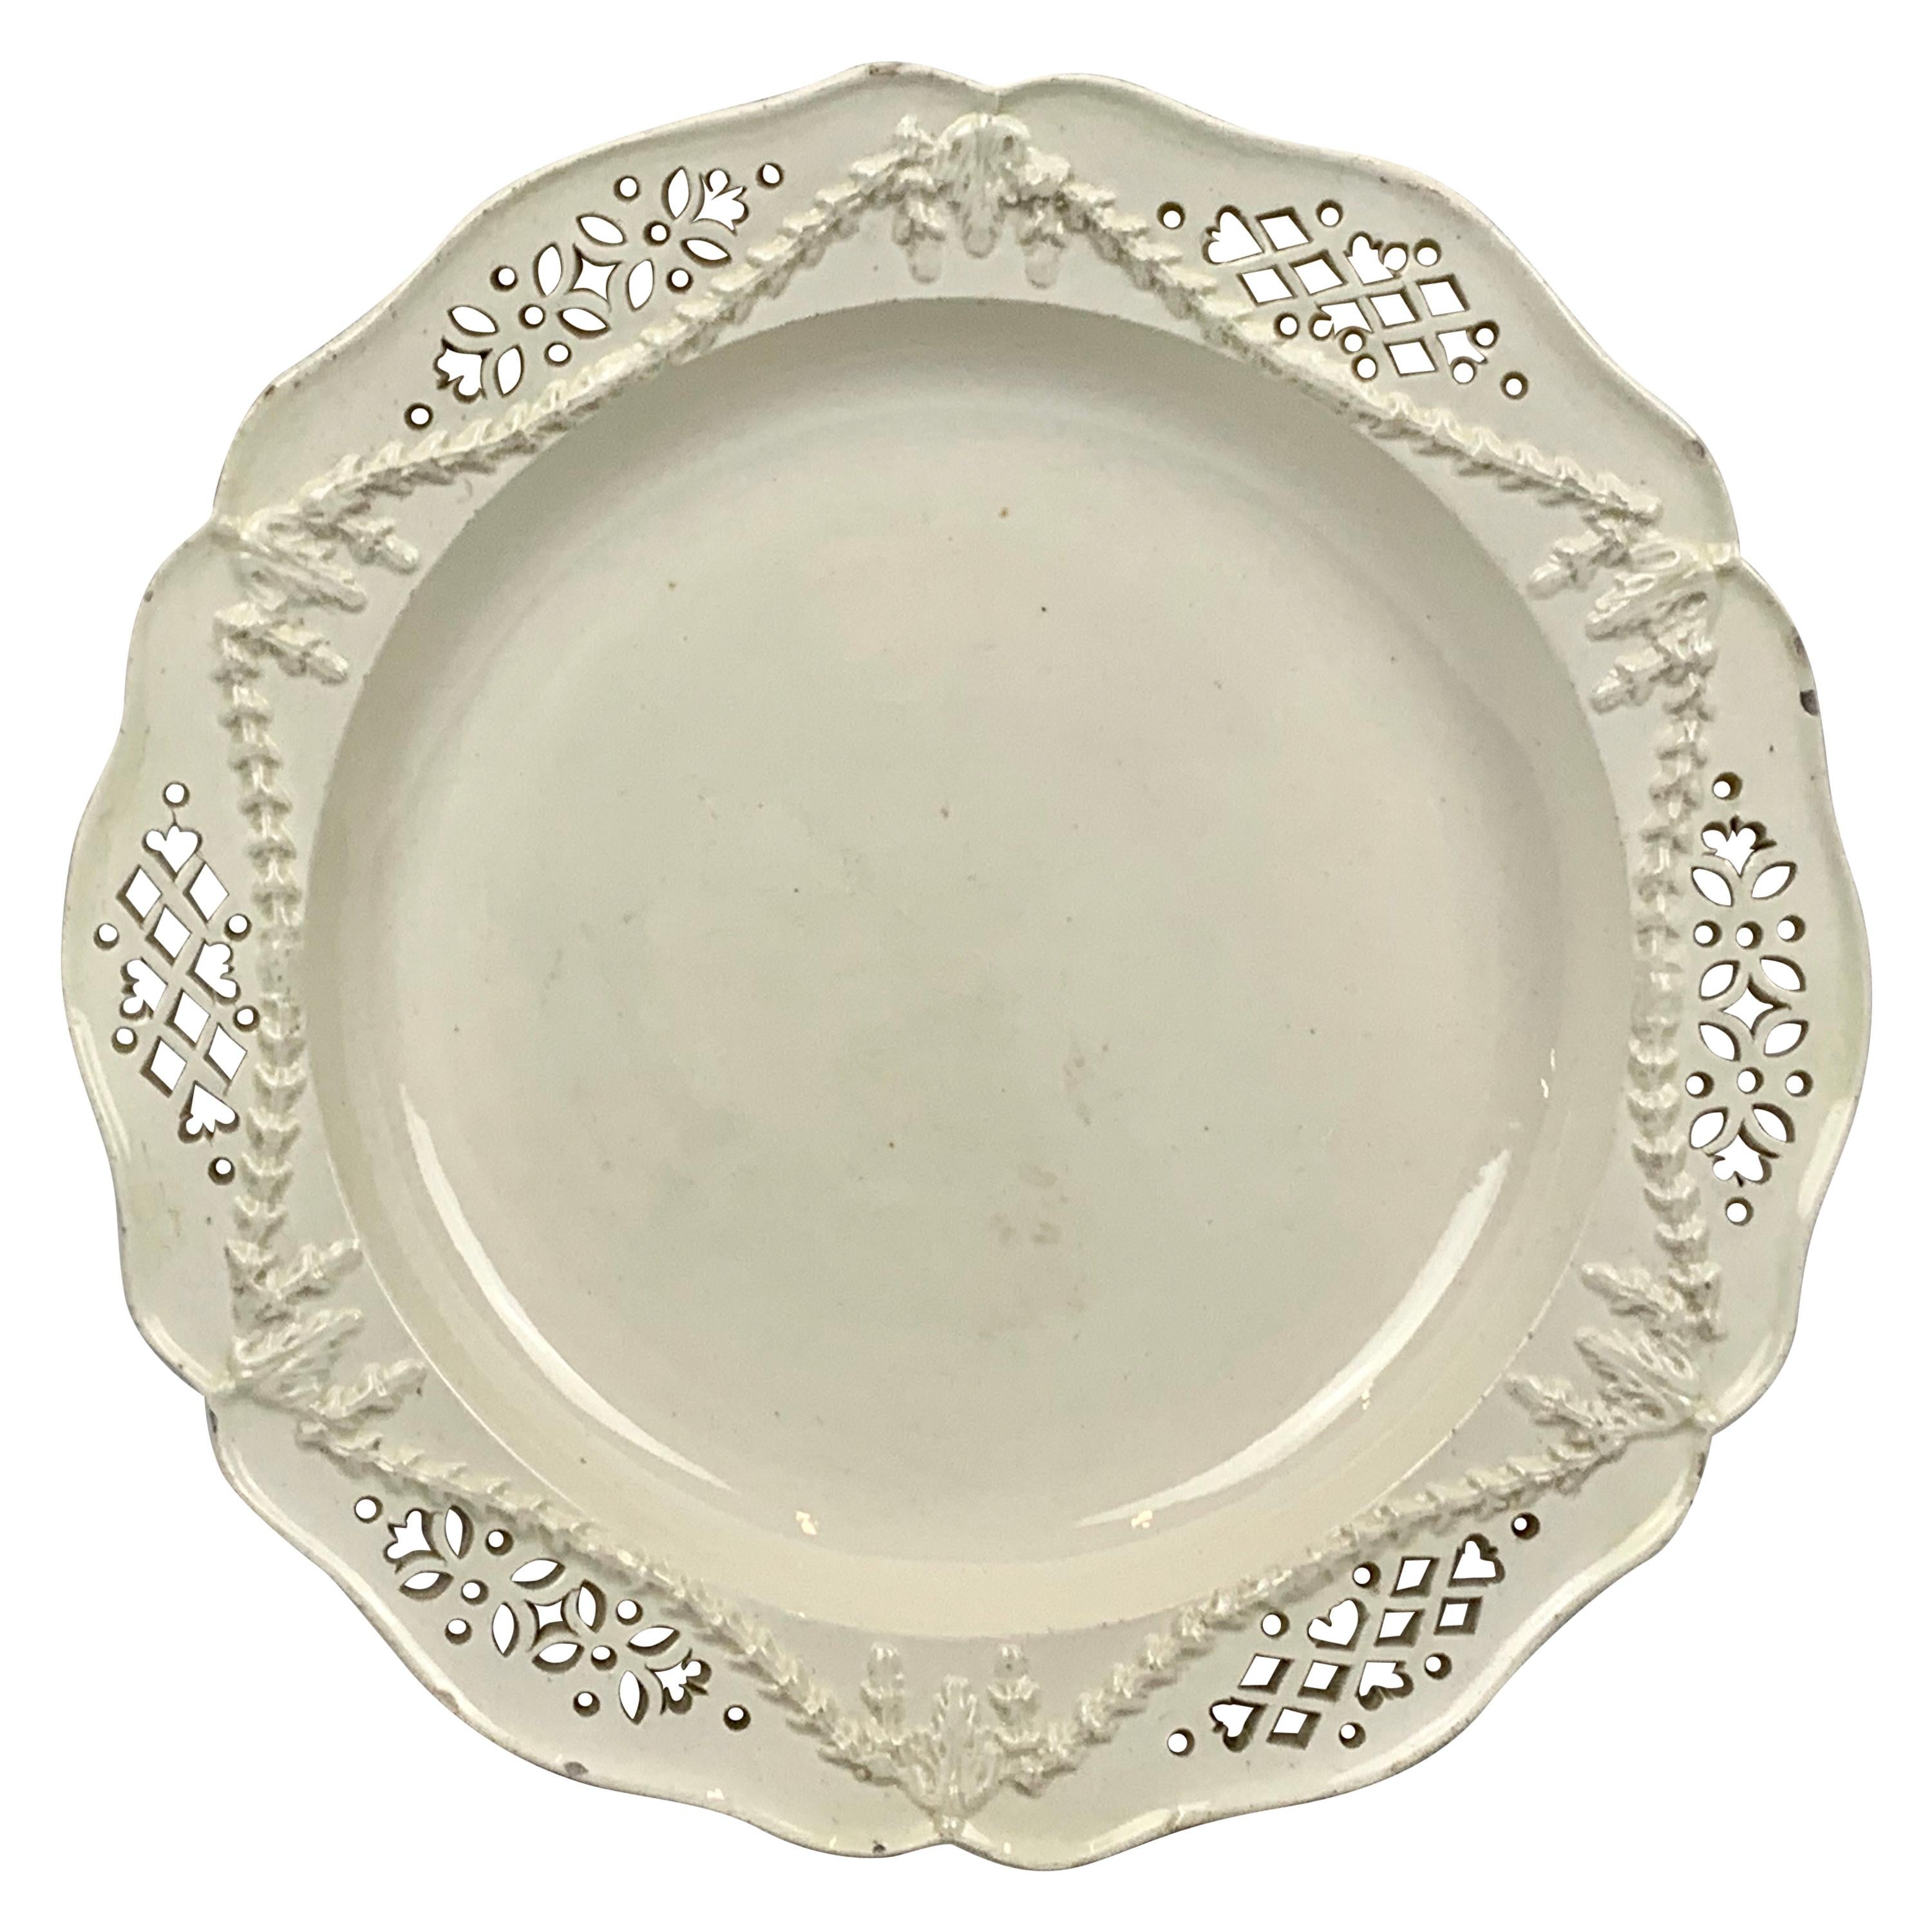 Antique Reticulated Creamware Plate-England, Late 18th Century